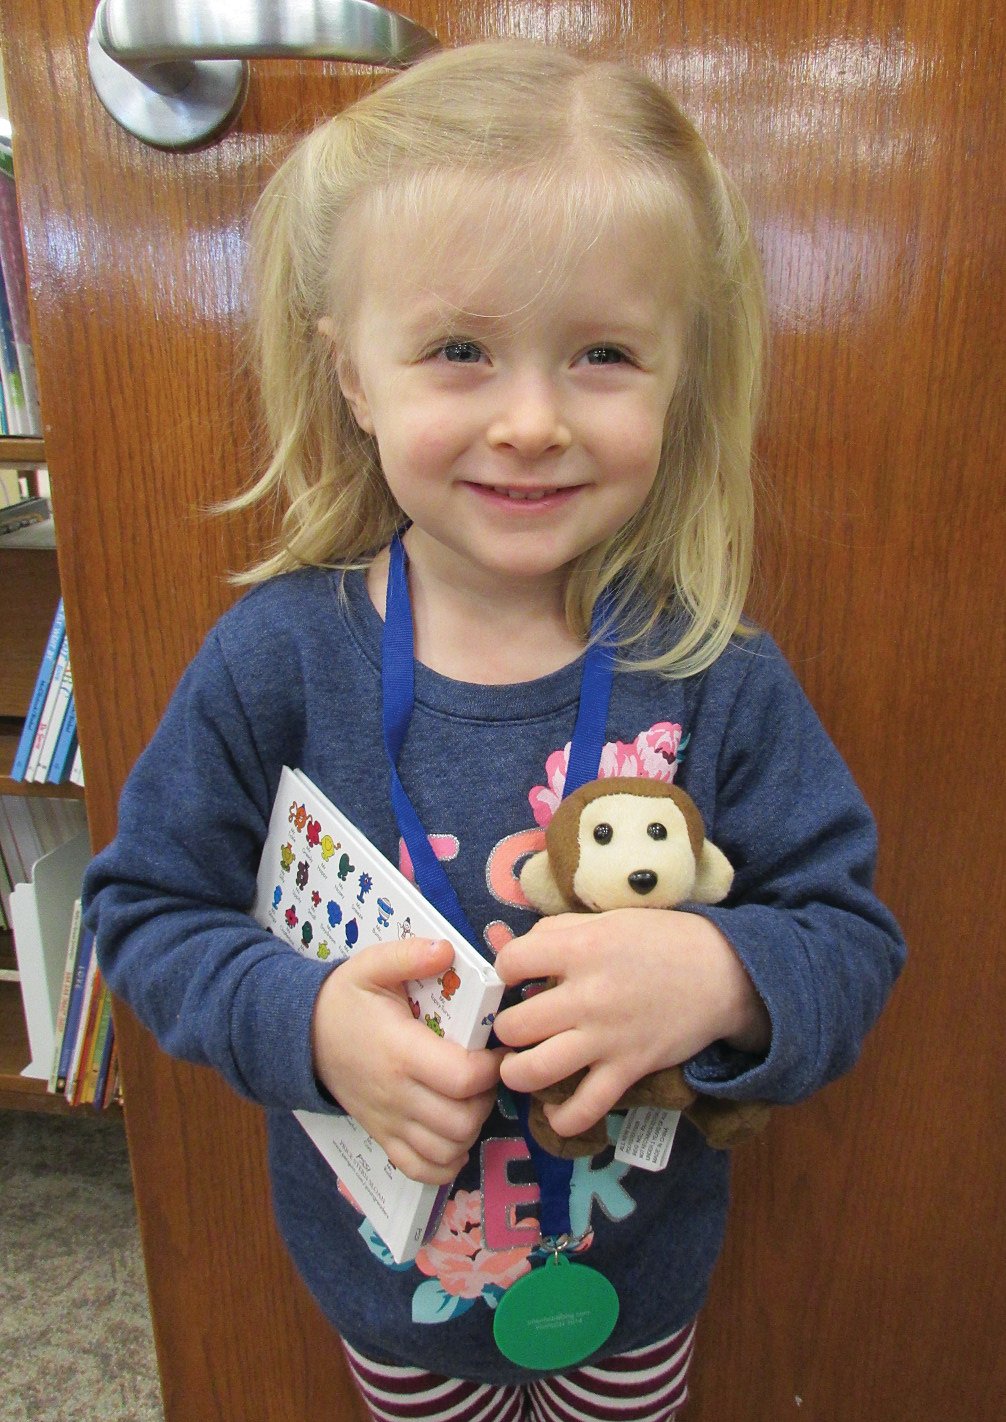 Sadie Raley, 3, completed the Crawfordsville District Public Library program 1,000 Books Before Kindergarten. She is the daughter of Kyle and Michelle Raley. Sadie's favorite book is "Who Says Woof?" by John Butler. Mom said, "We are so thankful for our library and this program. Sadie worked so hard to complete her 1,000 books. She asked family members to read to her and even tried to "read" herself."